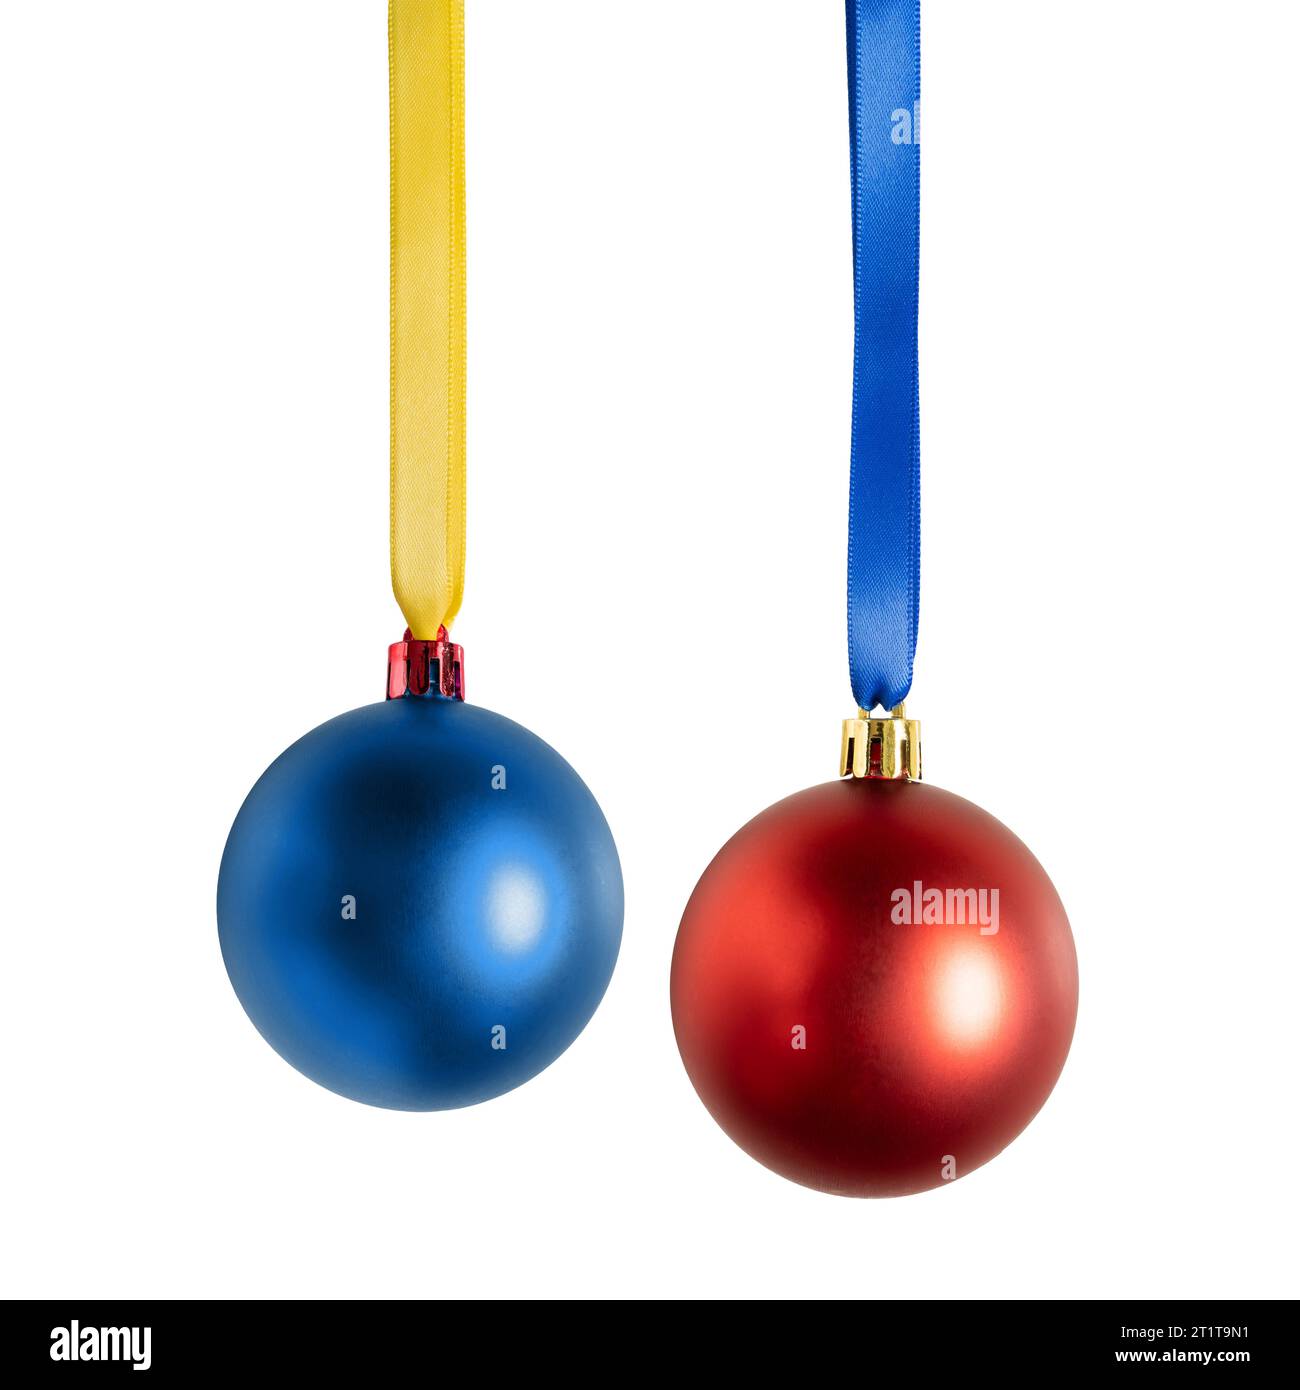 Blue and red Christmas balls with yellow and blue ribbon on white background with clipping path Stock Photo